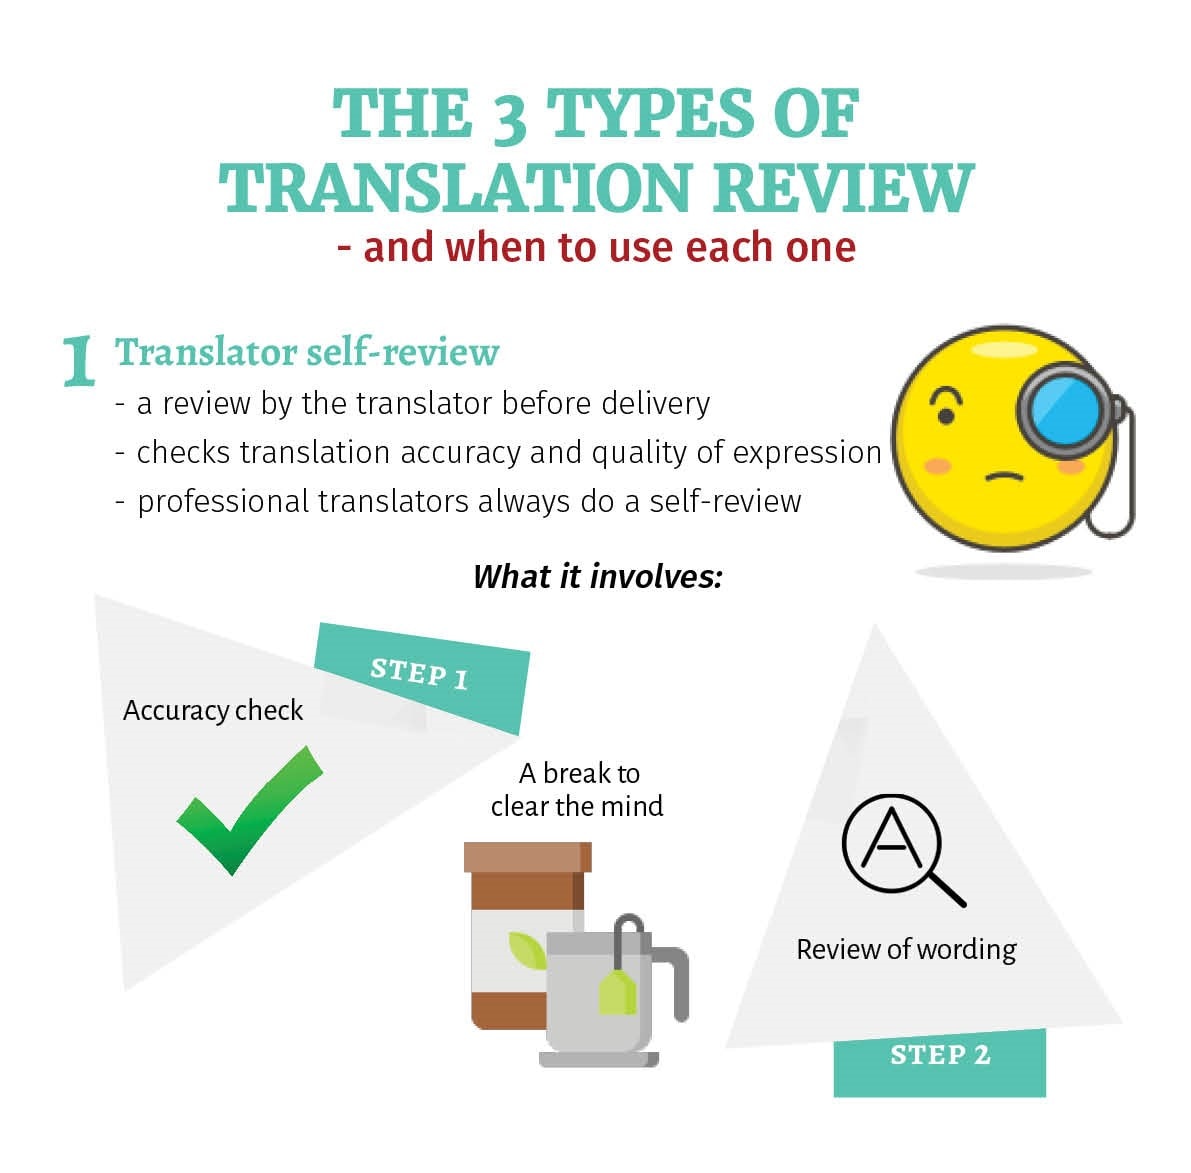 Beschikbaar Paard Veel The 3 types of translation review, and when to use each one